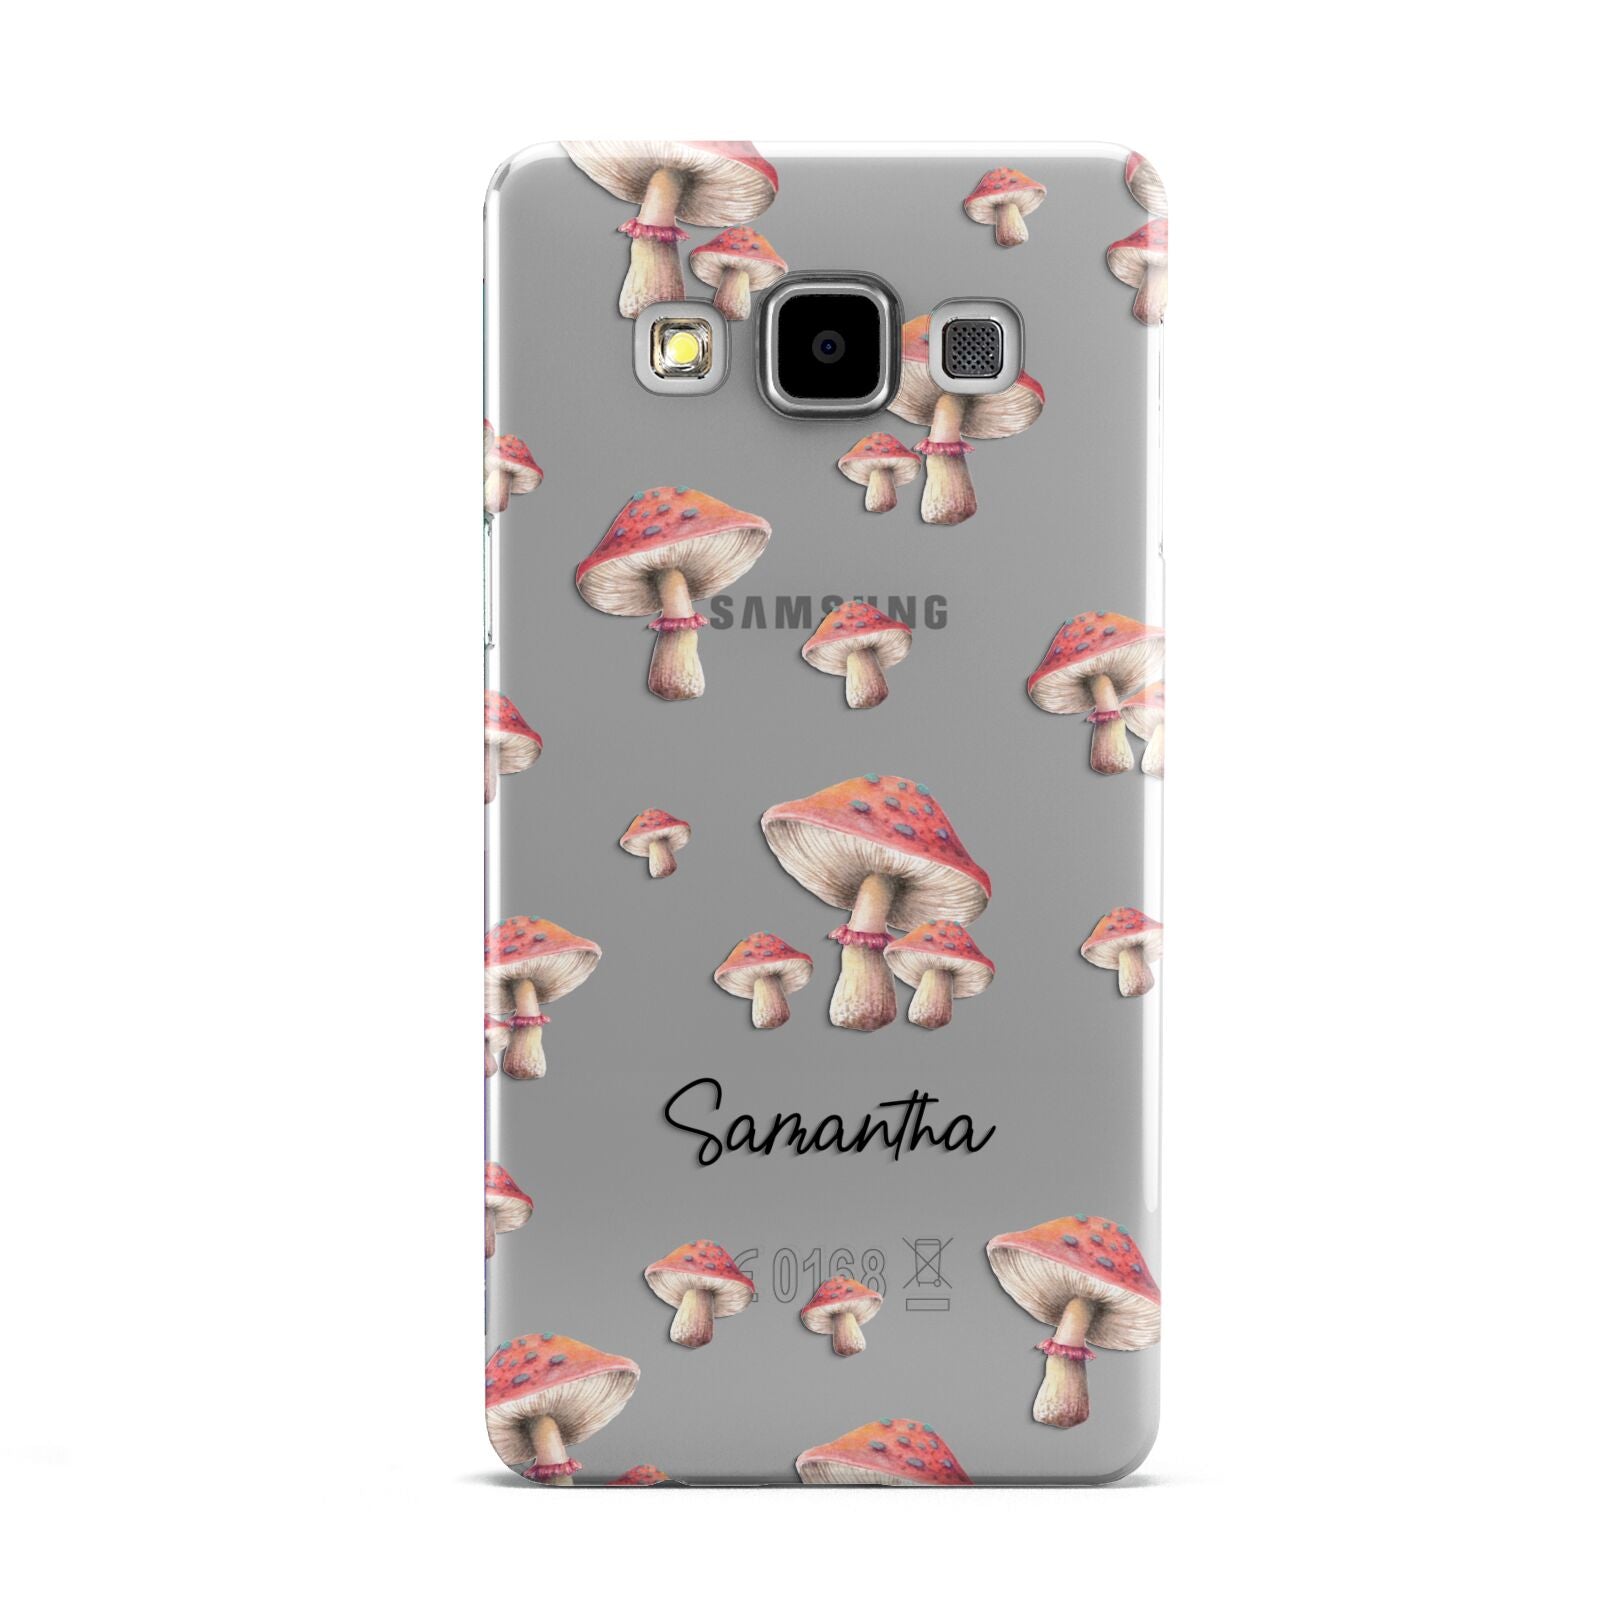 Mushroom Illustrations with Name Samsung Galaxy A5 Case